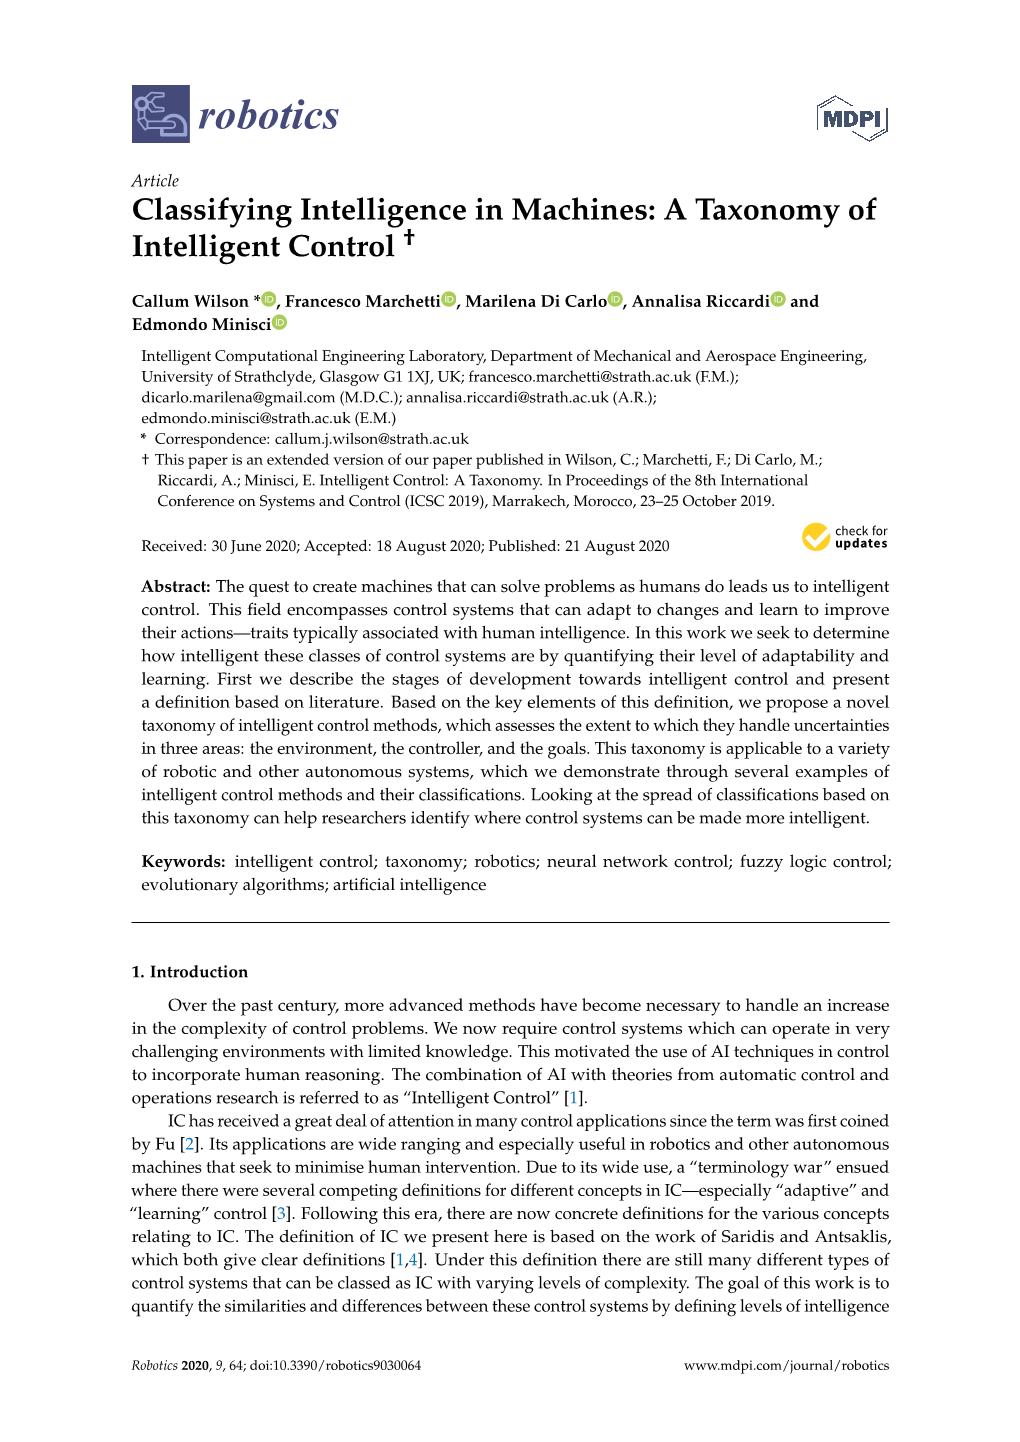 Classifying Intelligence in Machines: a Taxonomy of Intelligent Control †